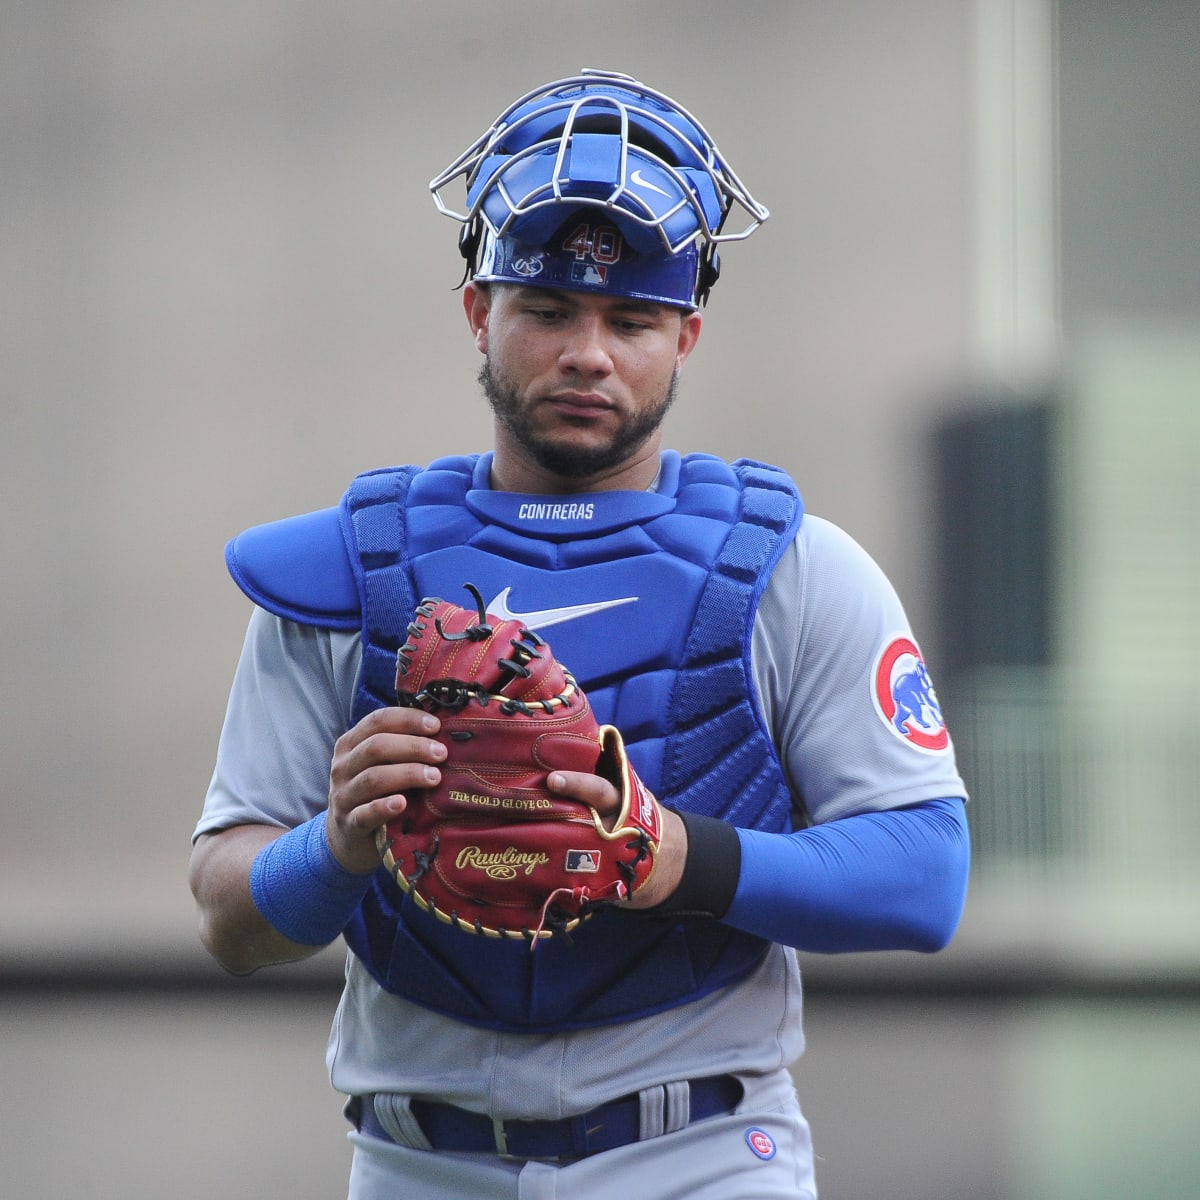 Cubs' Happ hits Cardinals catcher Contreras in head with follow